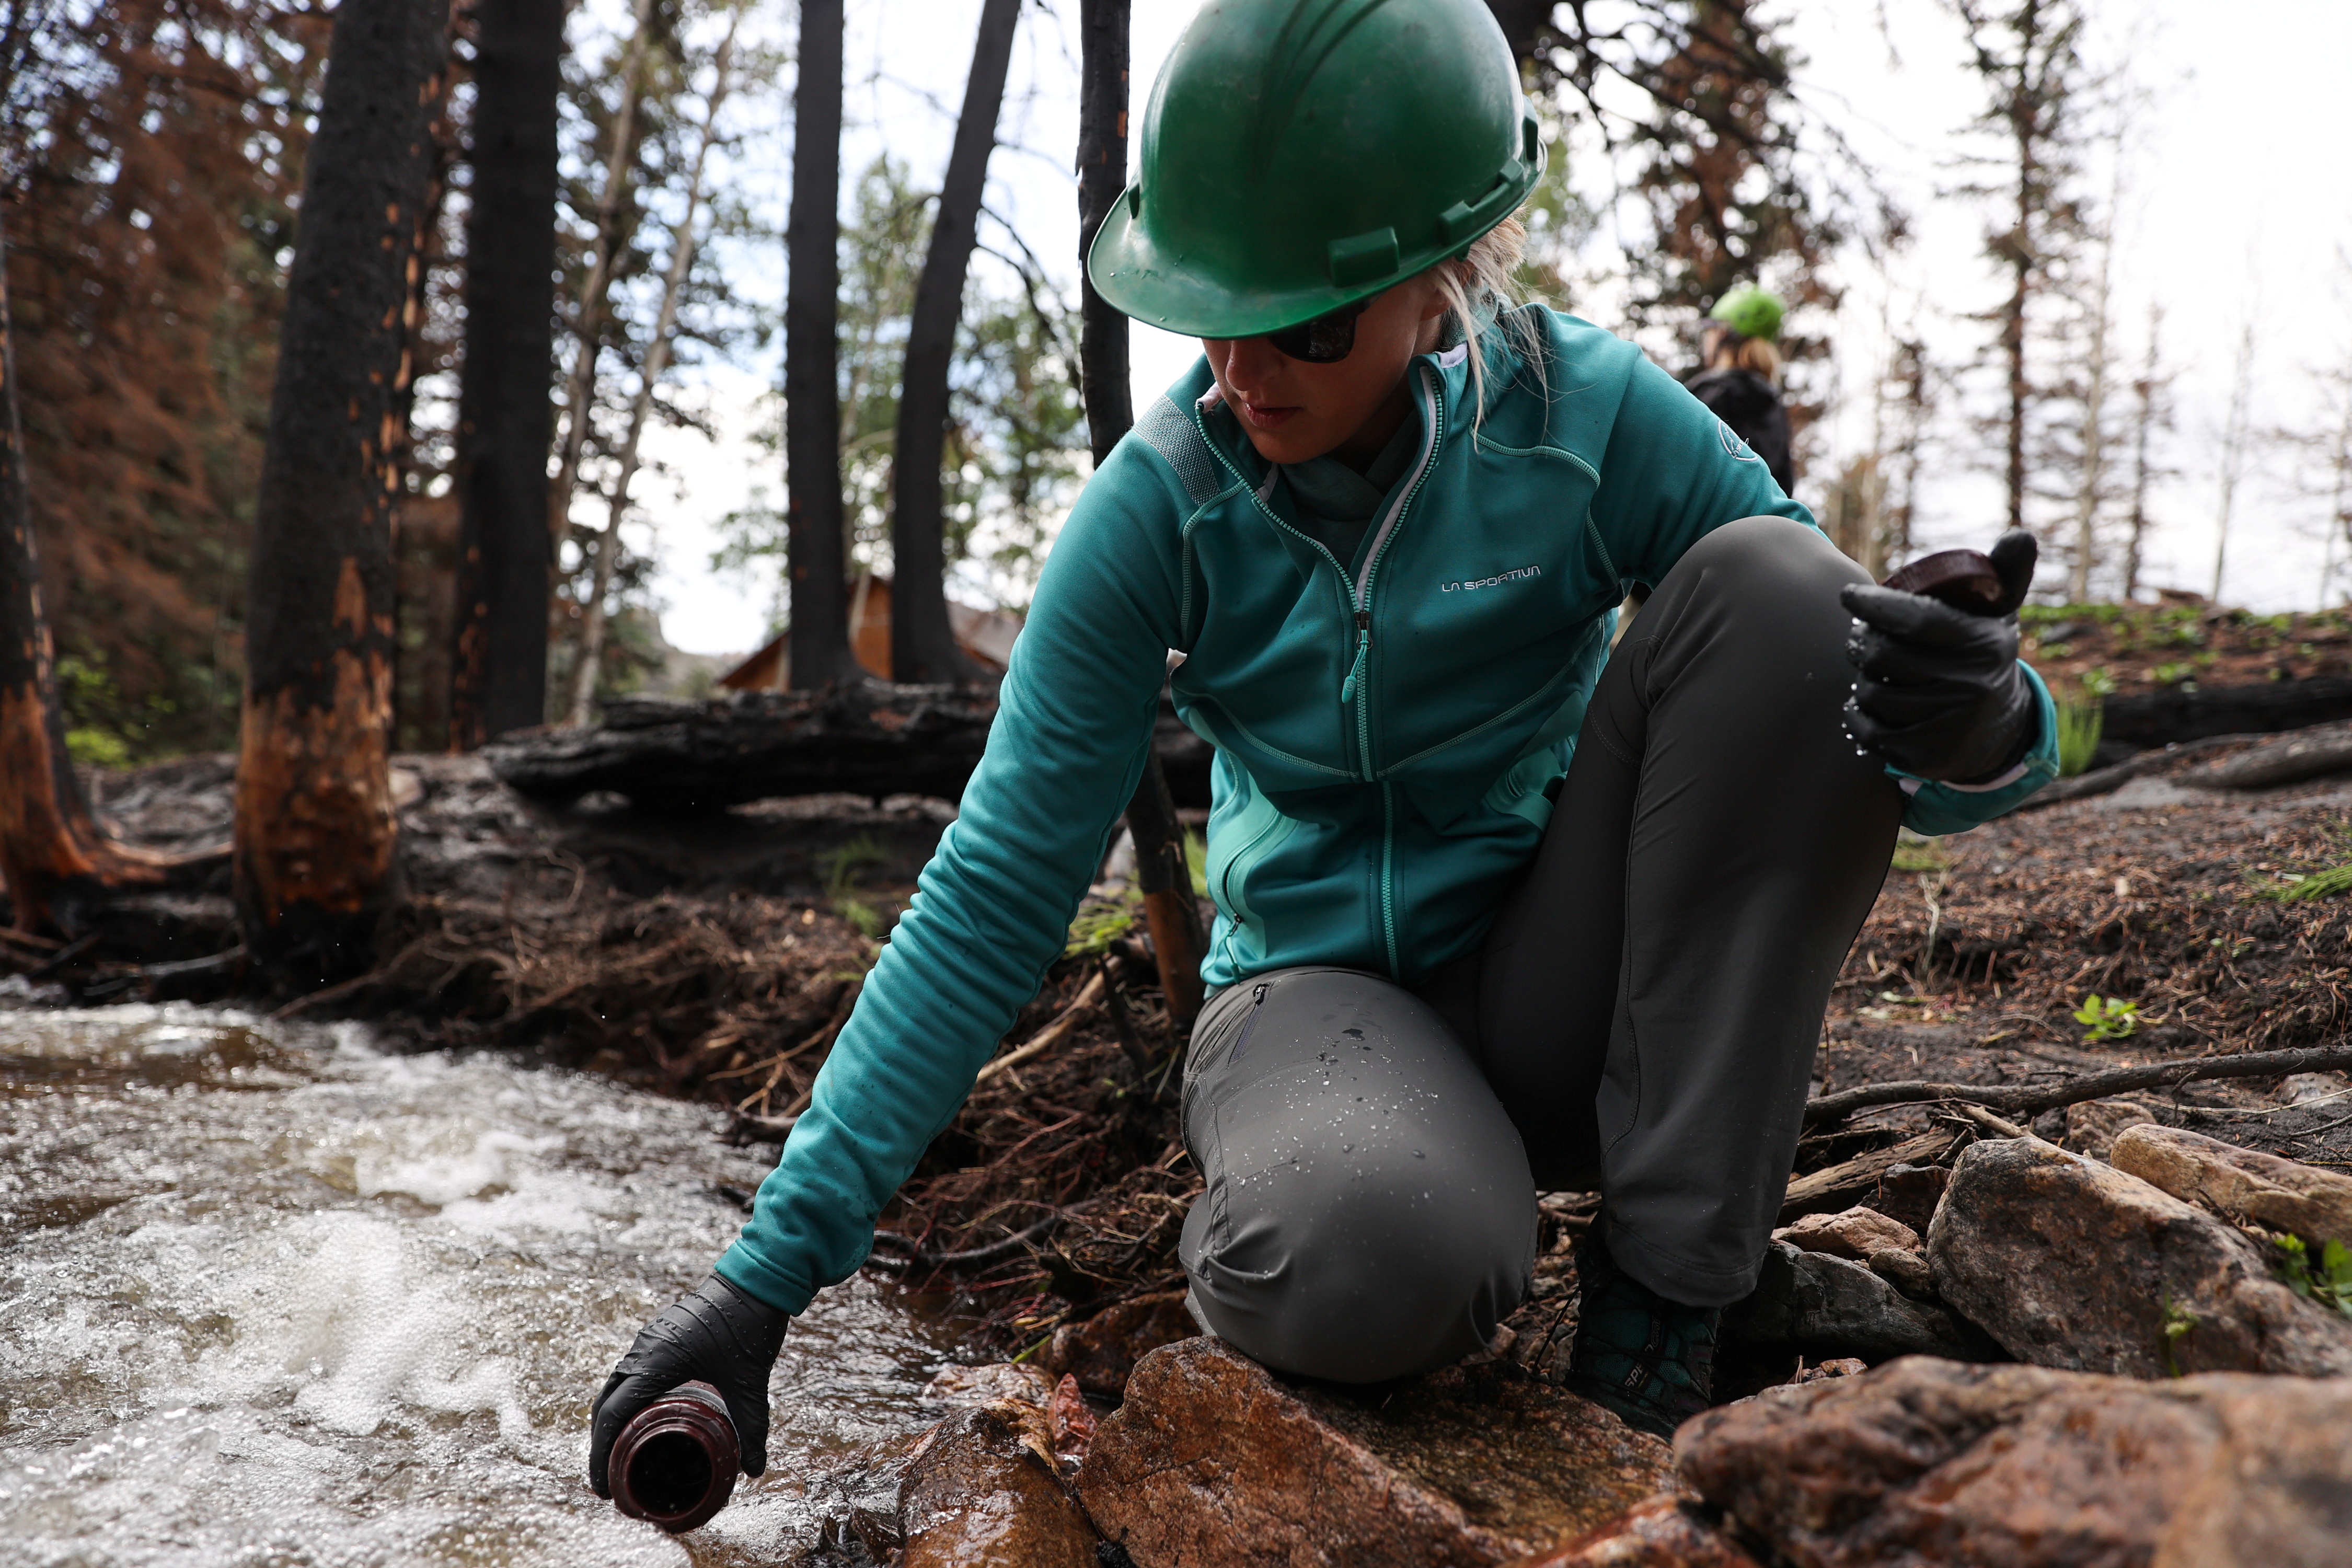 Megan Sears, a field technician with the United States Forest Service, collects a water sample from a tributary to the Poudre River inside the Cameron Peak fire burn scar west of Fort Collins